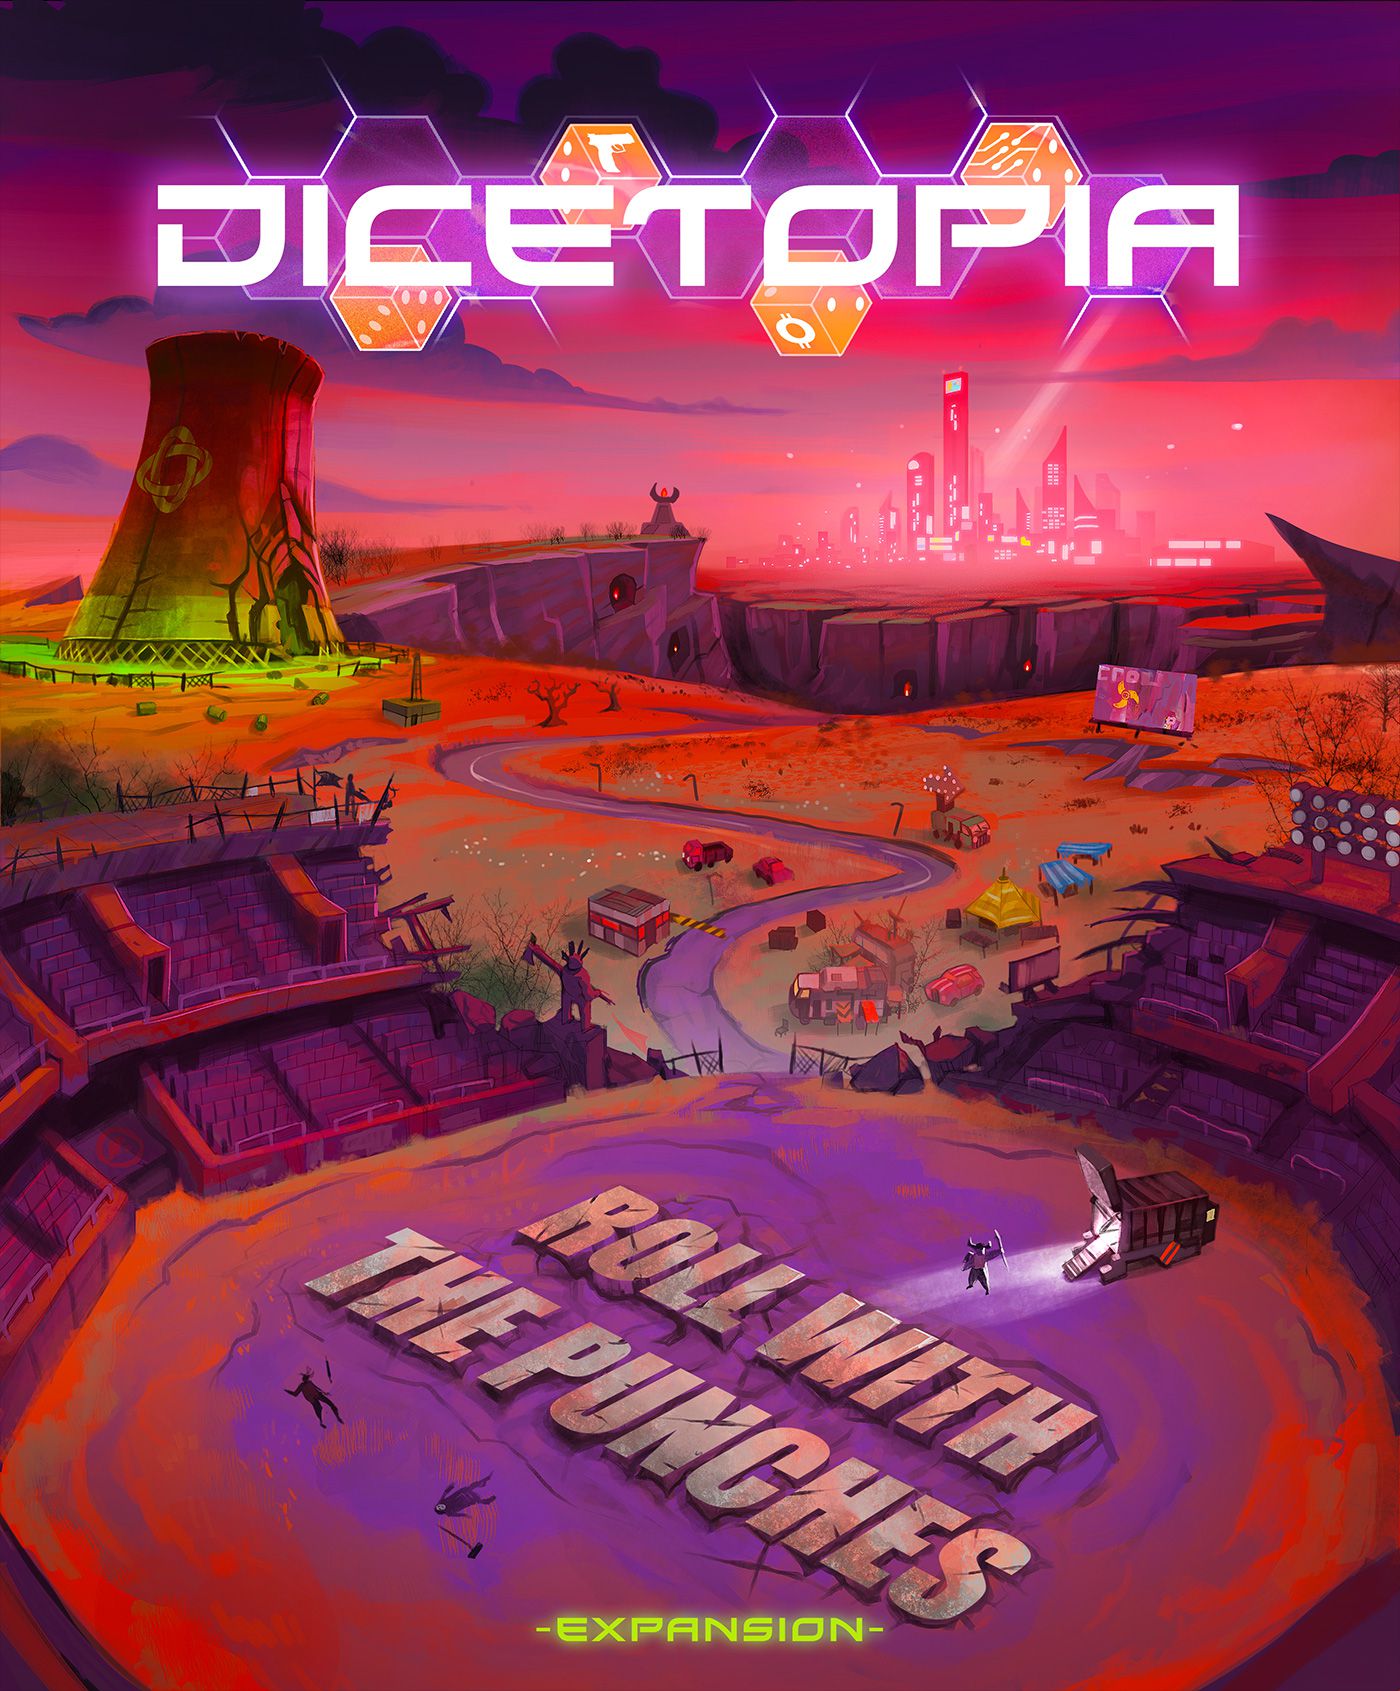 Dicetopia: Roll with the Punches